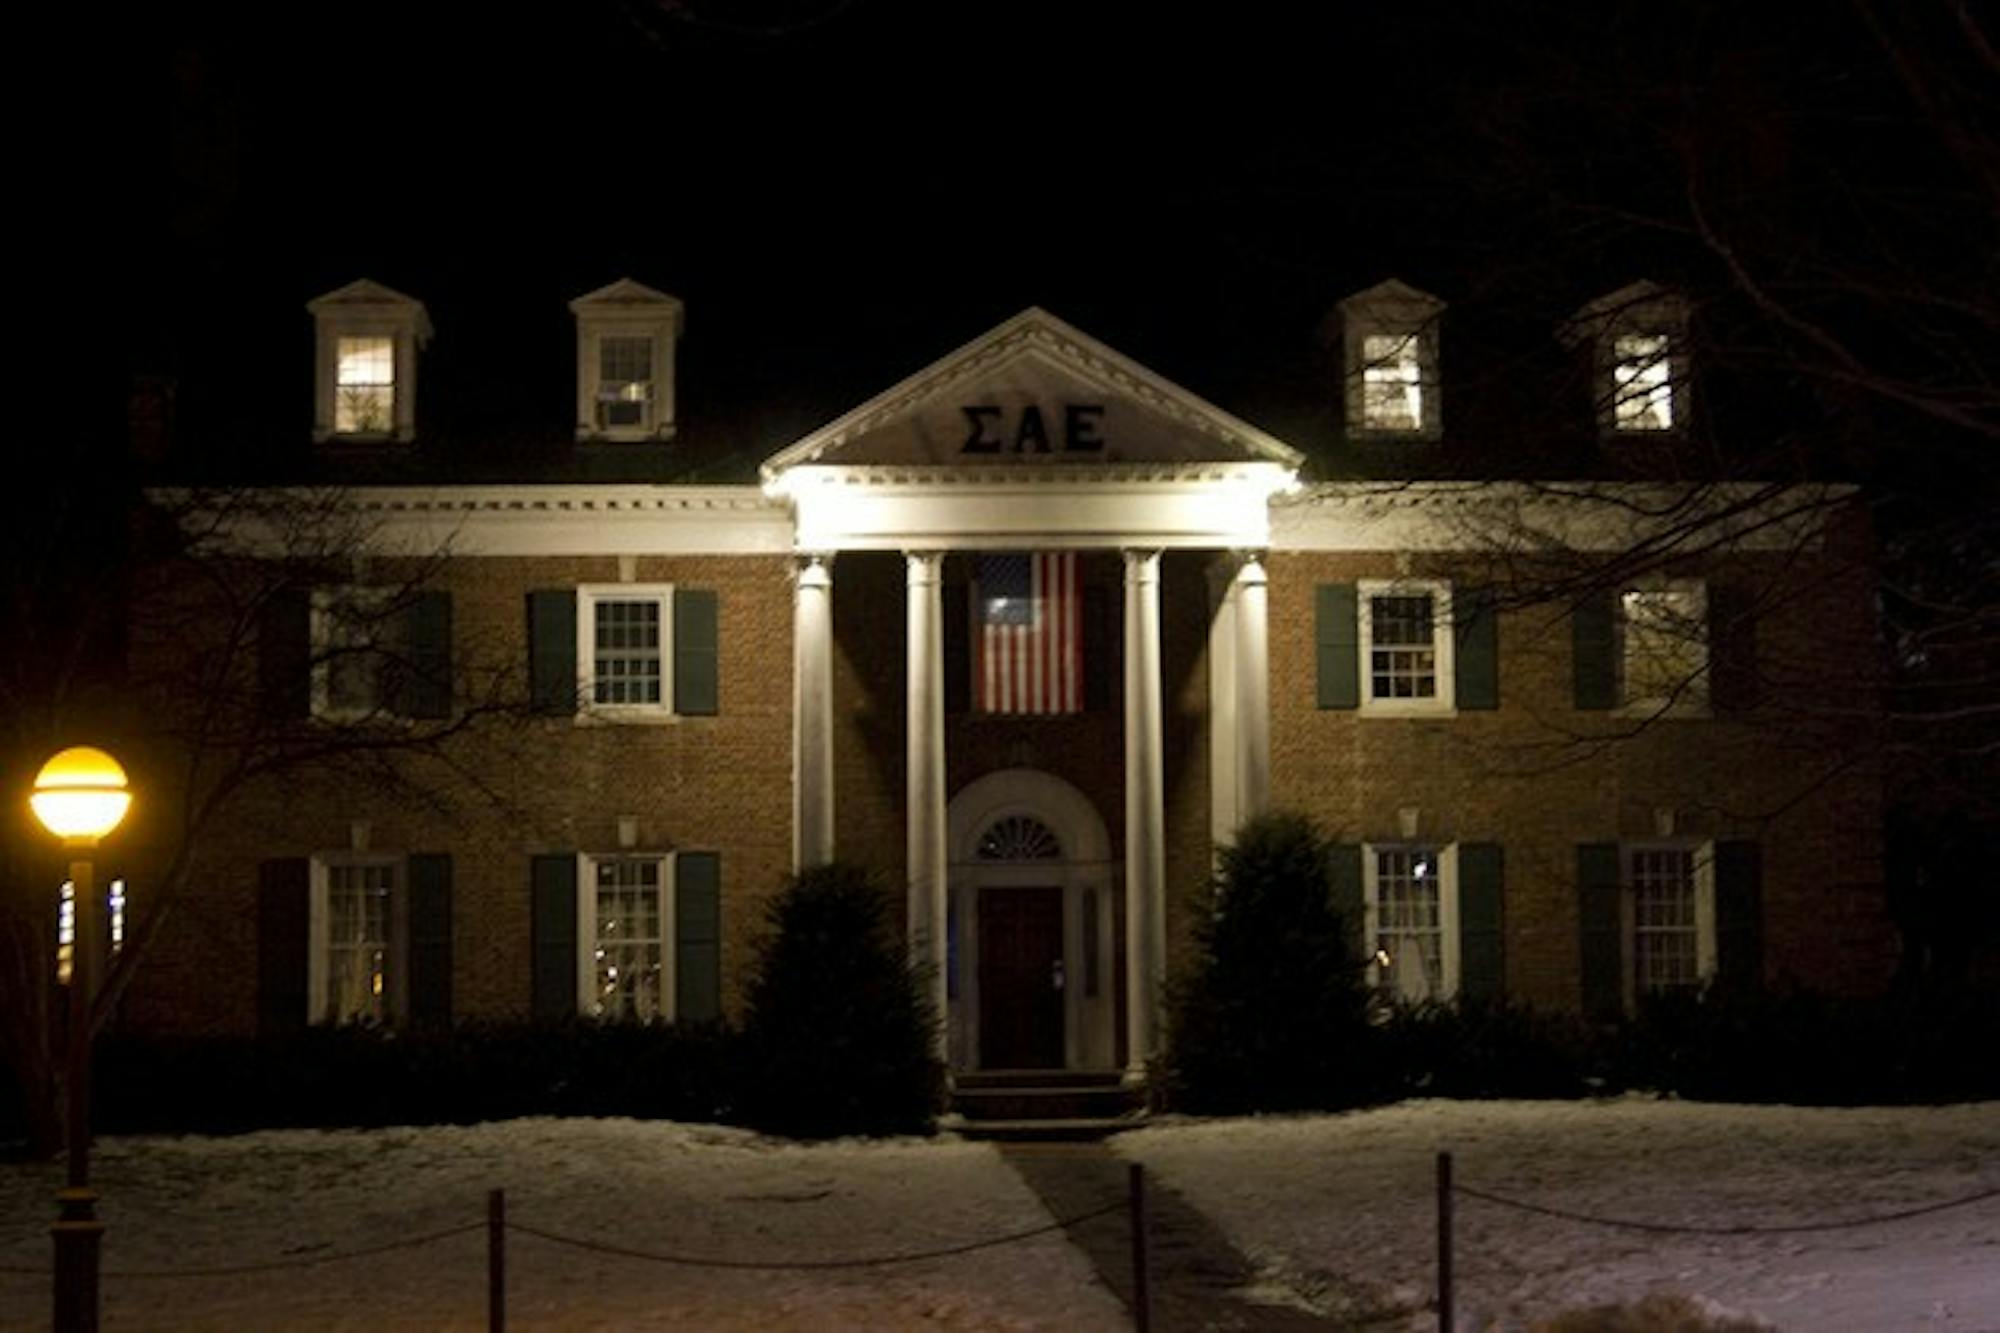 Andrew Lohse '12 has accused the College of taking inadequate action in response to his allegations of hazing at his former fraternity, Sigma Alpha Epsilon.